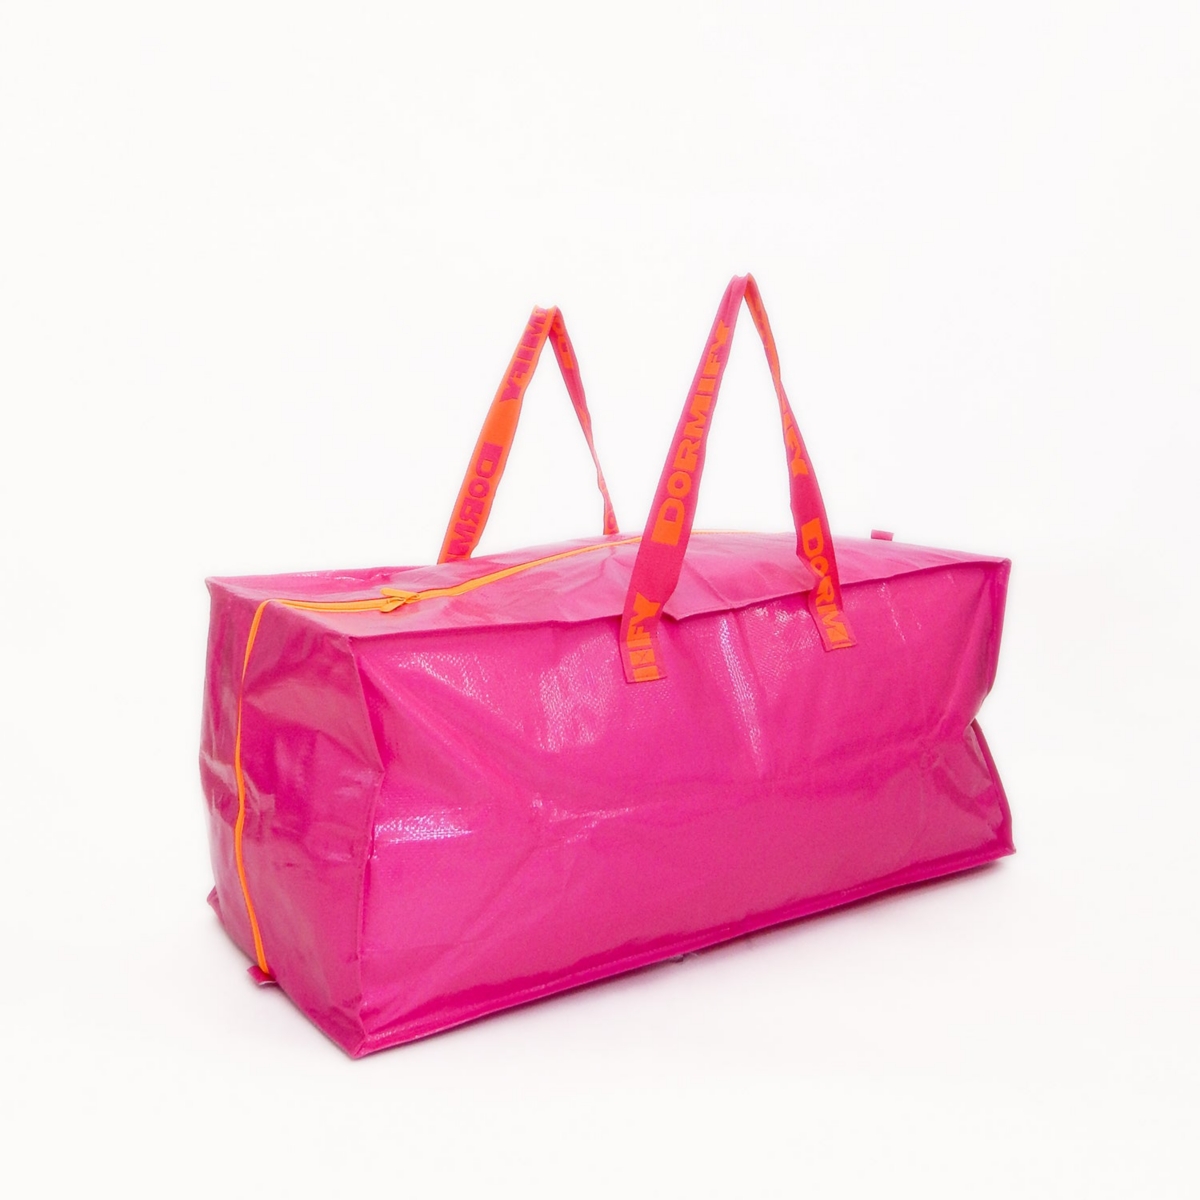 Storage Duffle Bag for College Dorms - Hot pink